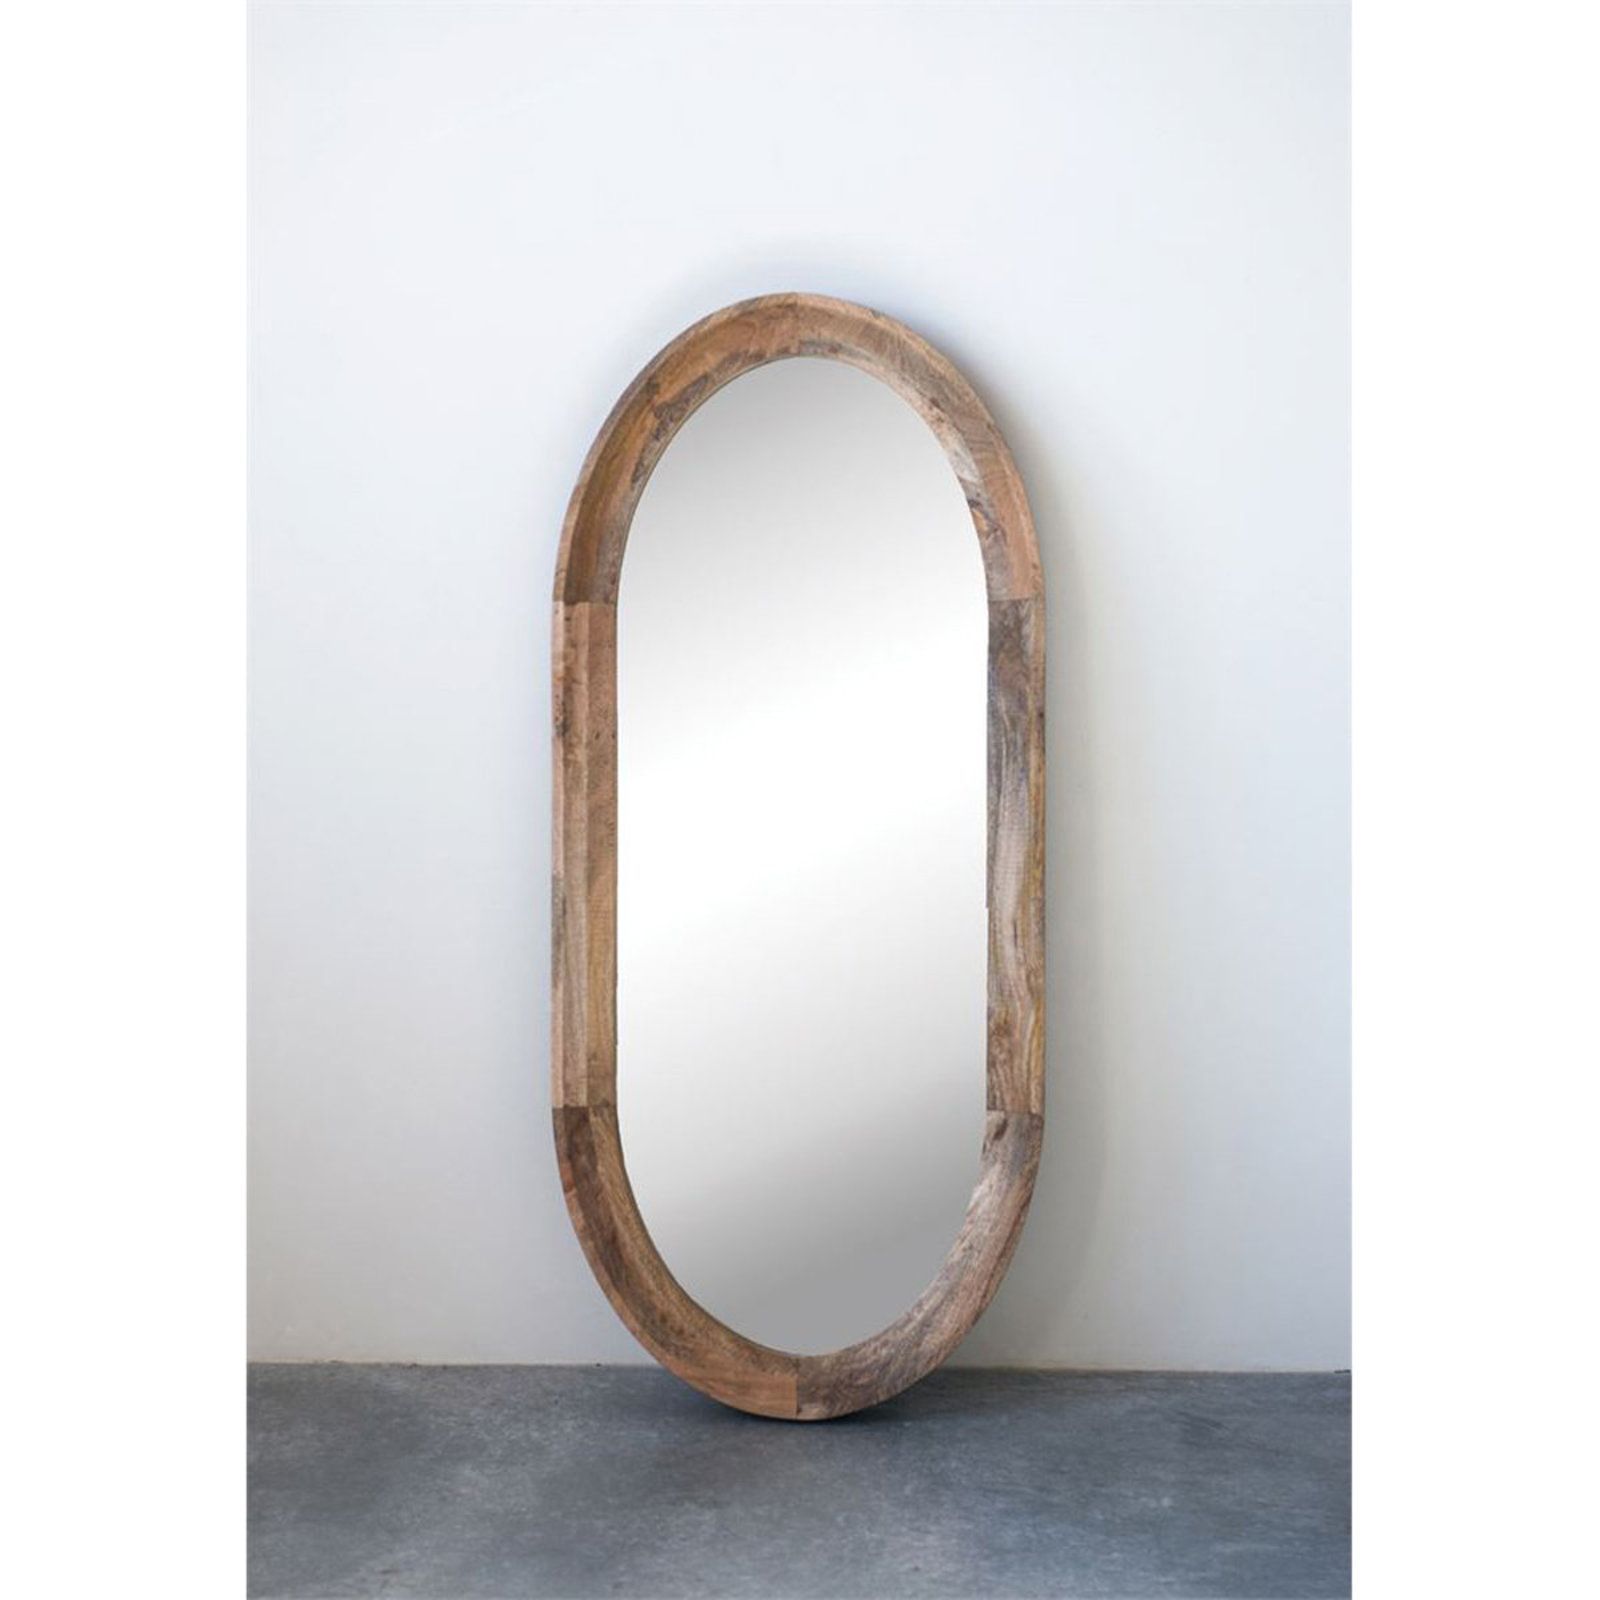 Oval Mango Mirror | Oval Wall Mirror, Brown Wall Mirrors, Mirror Wall Within Wooden Oval Wall Mirrors (View 1 of 15)